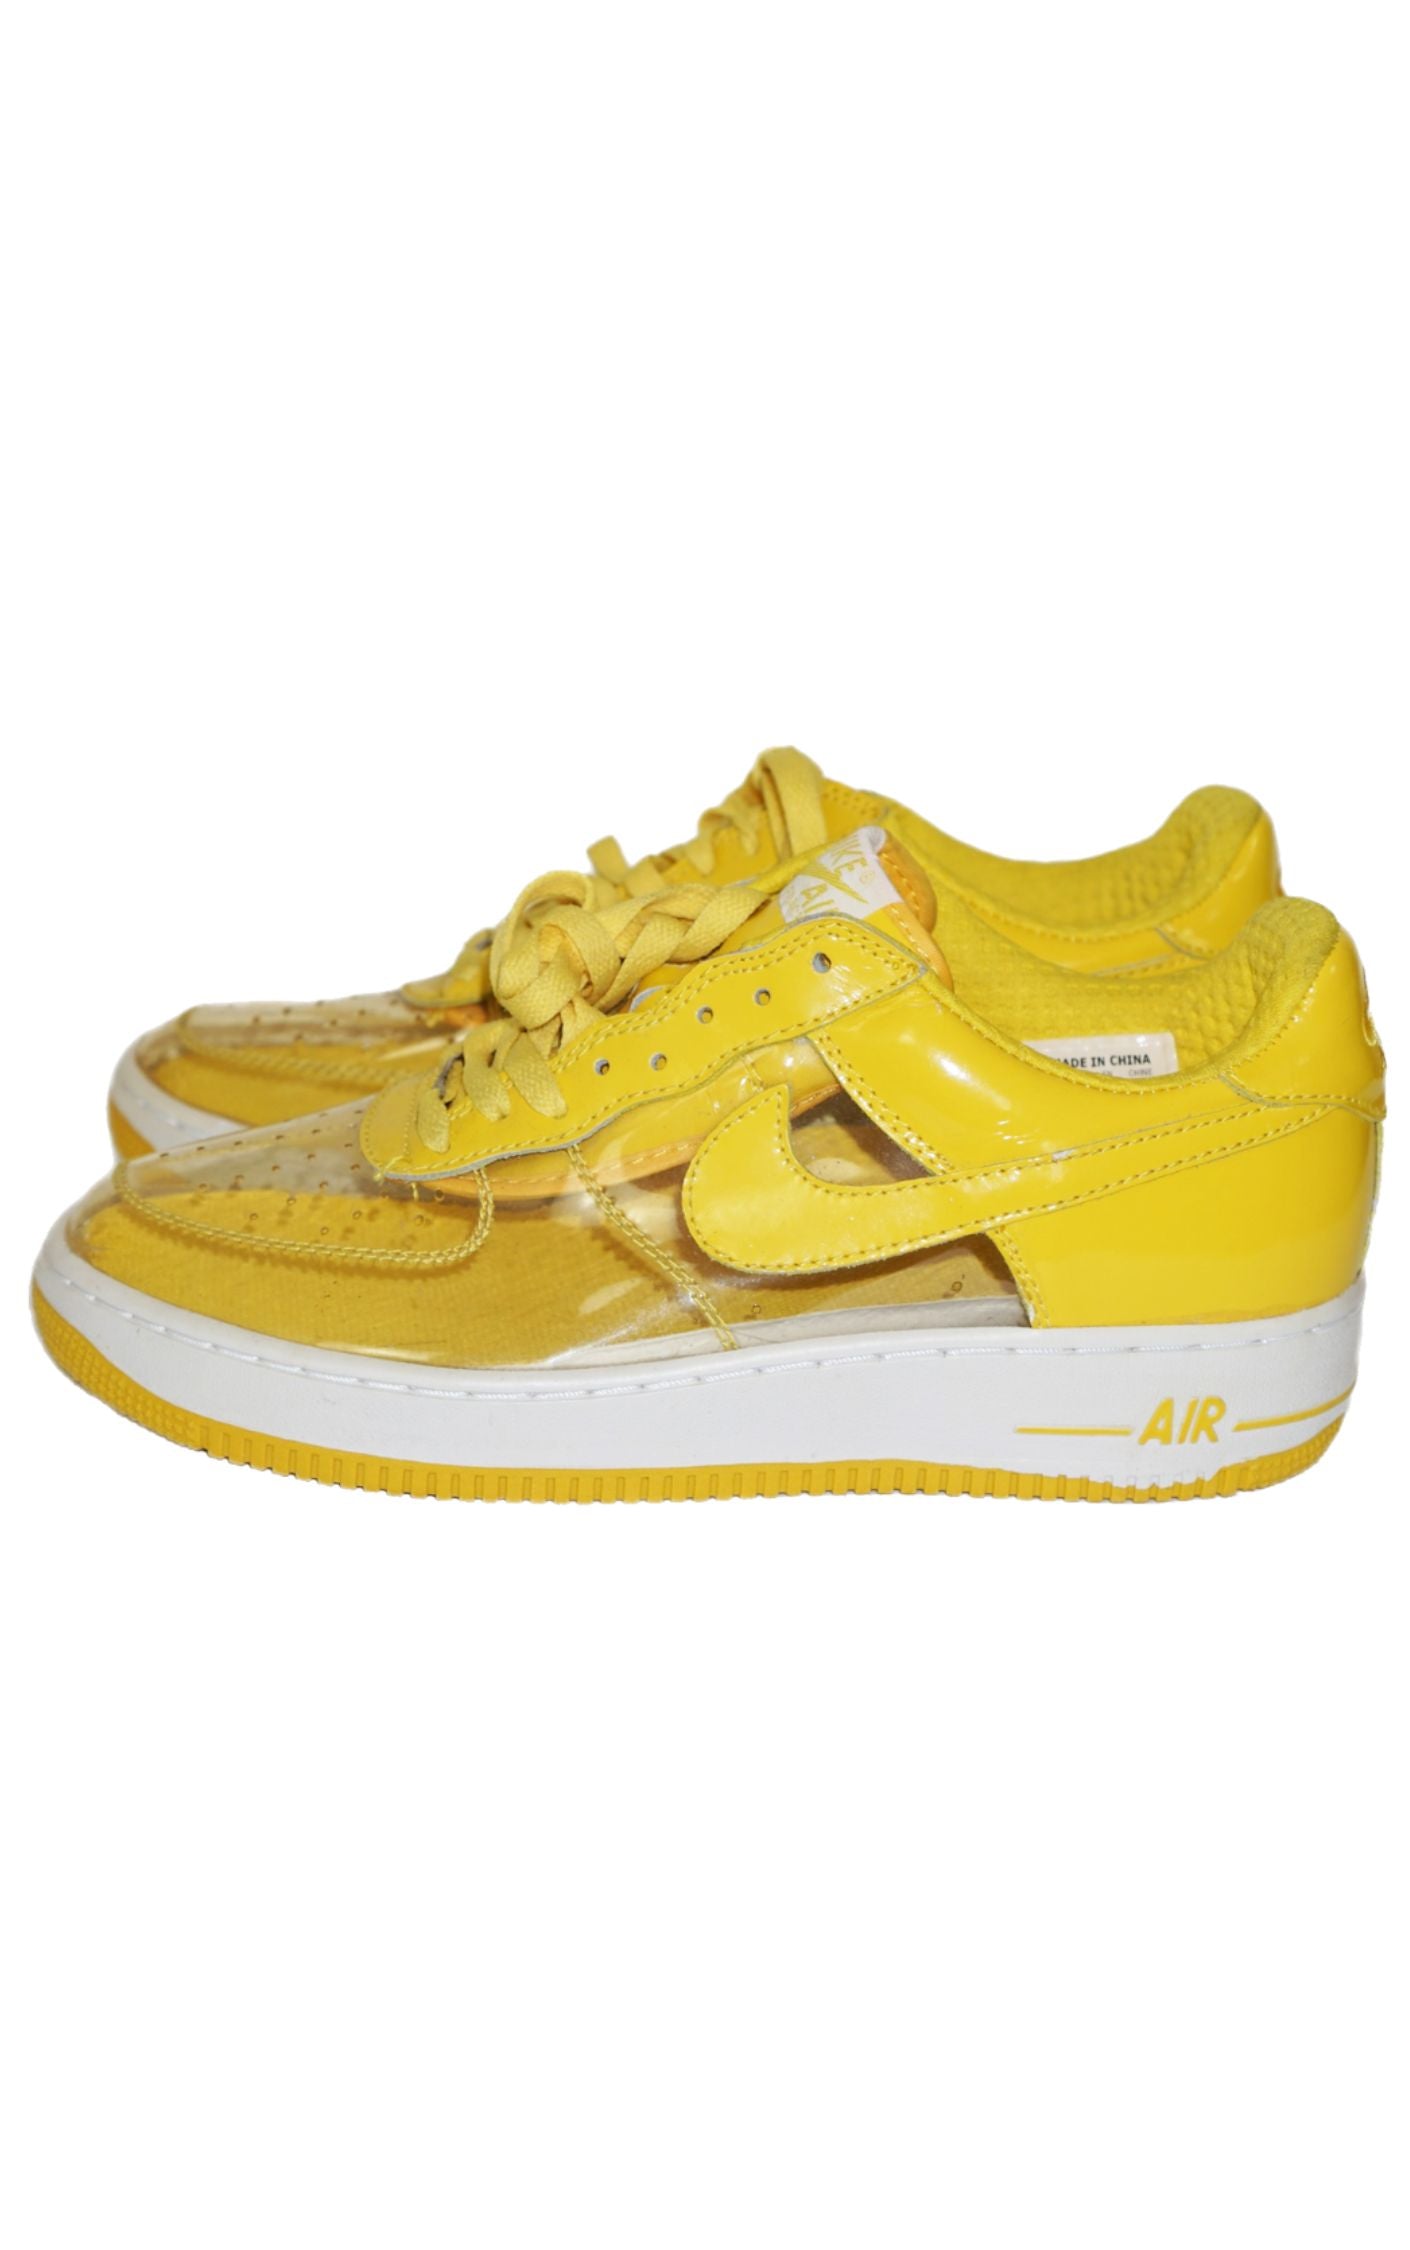 NIKE AF 1 Invisible Clear Transparent Yellow Sneakers resellum